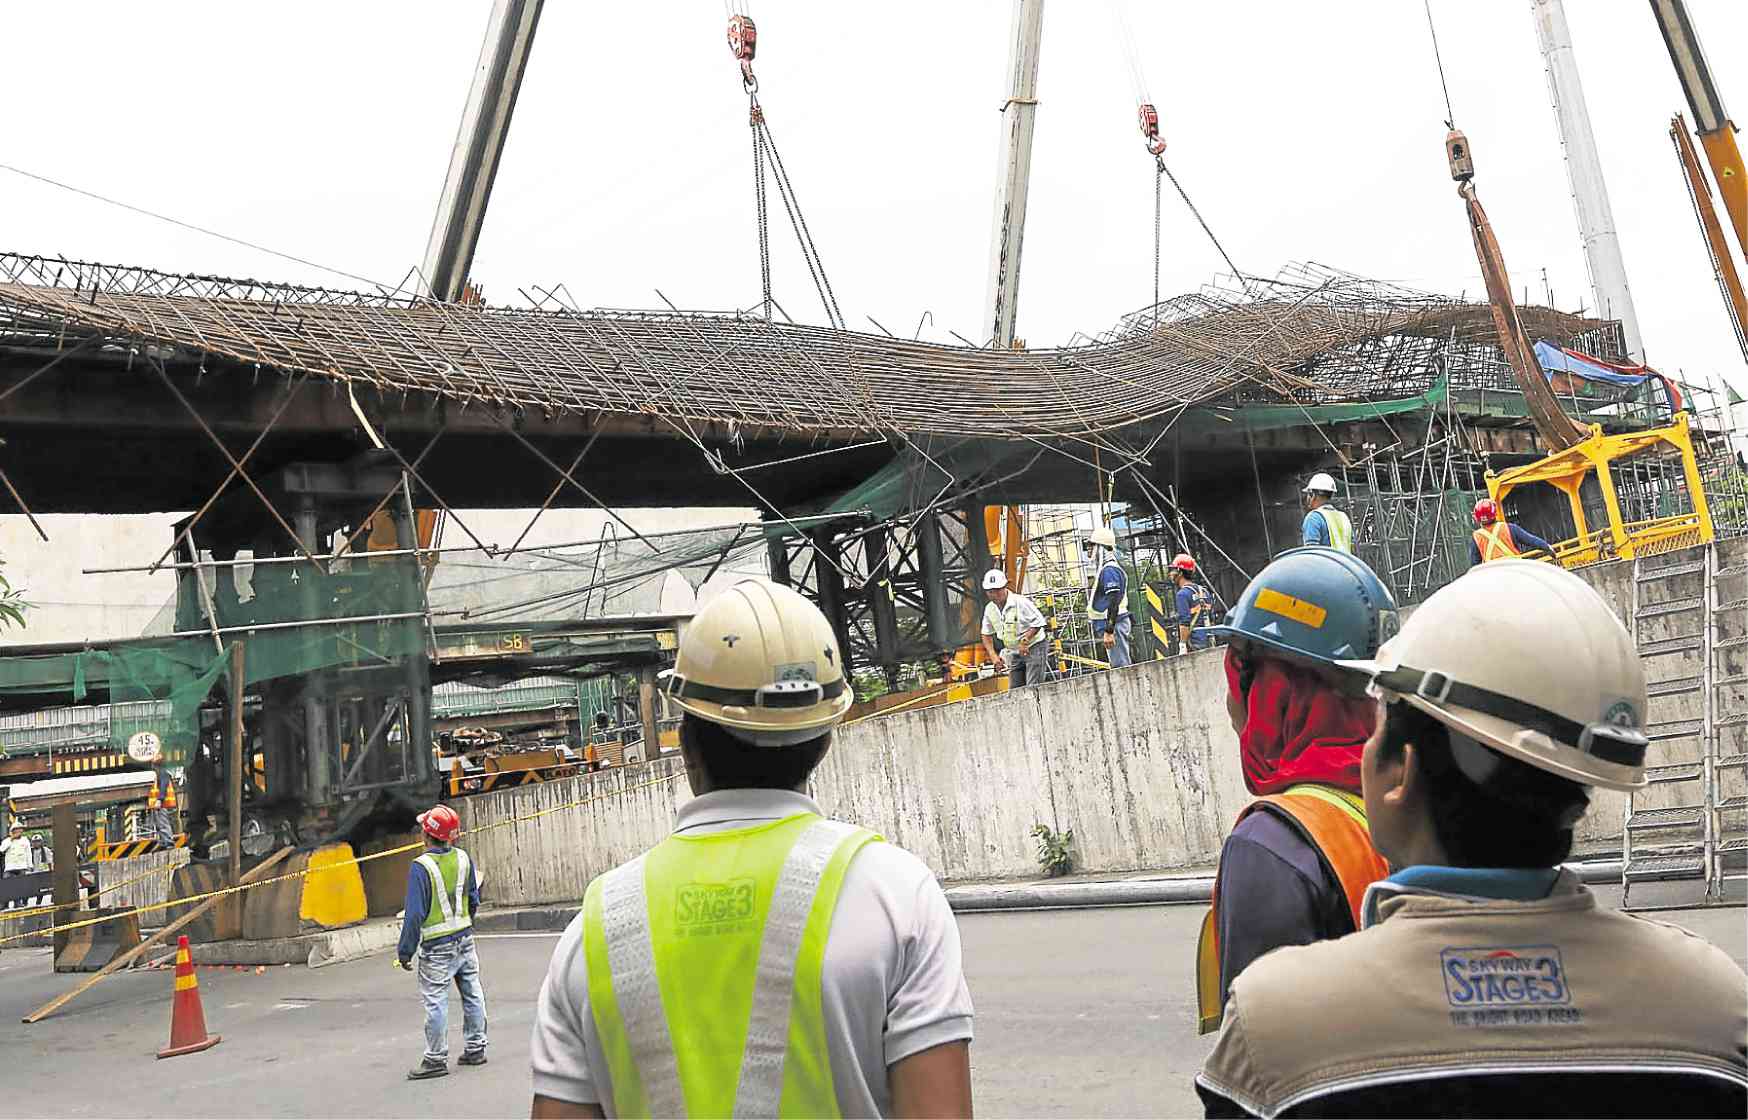 5 hurt as beam at Skyway project site collapses | Inquirer News